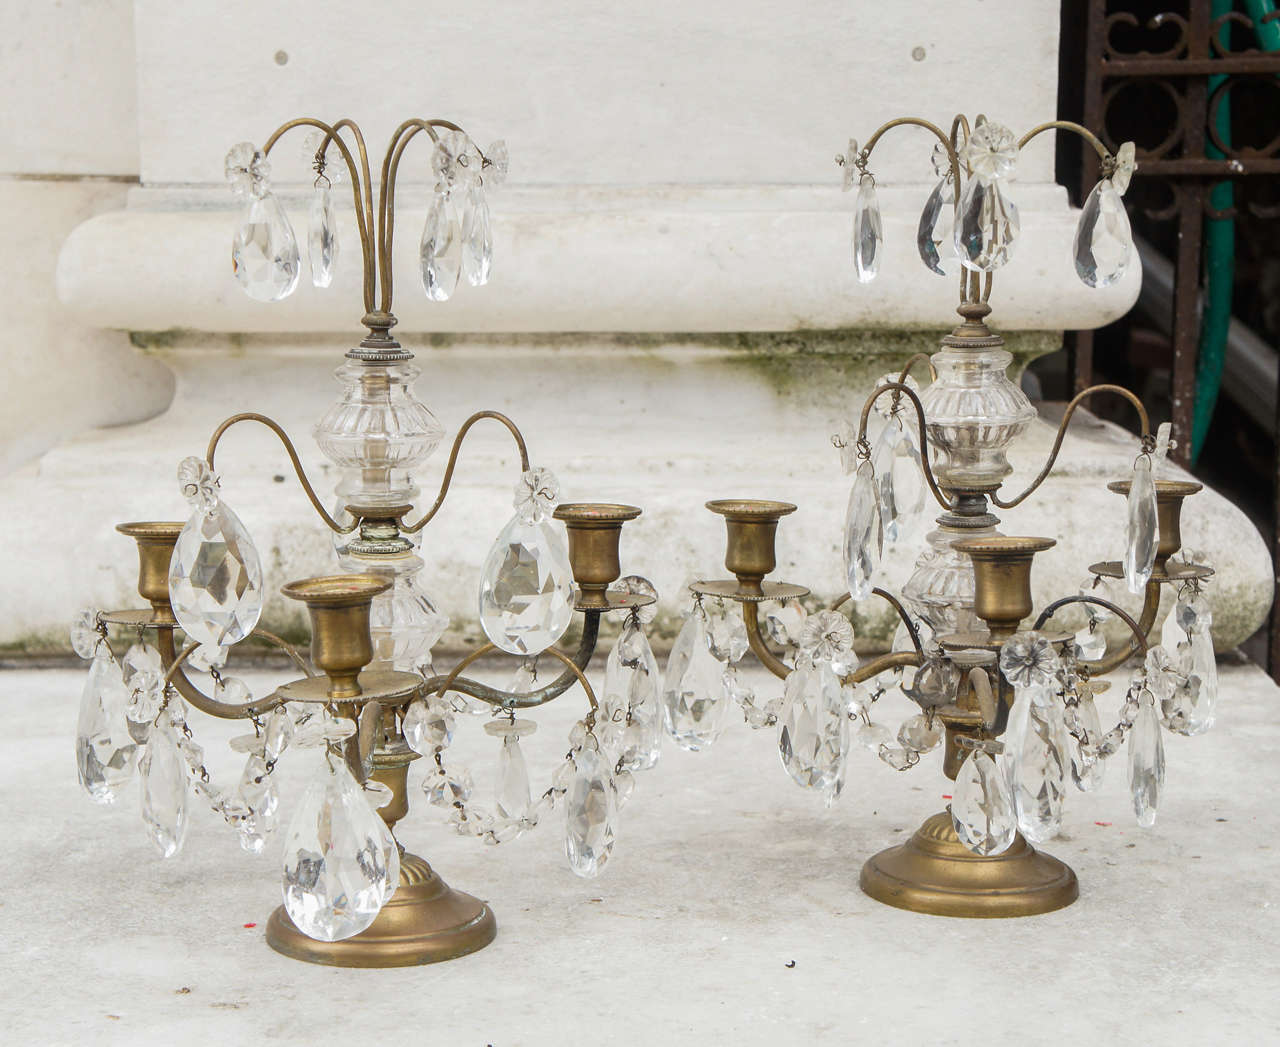 This lovely pair of 3 light lusters or candelabra are made in the Louis XVI style in France in the early 2oth century. This simple cast brass body or frame is decorated with blaster shaped spacers creating the upright section terminating in a brass